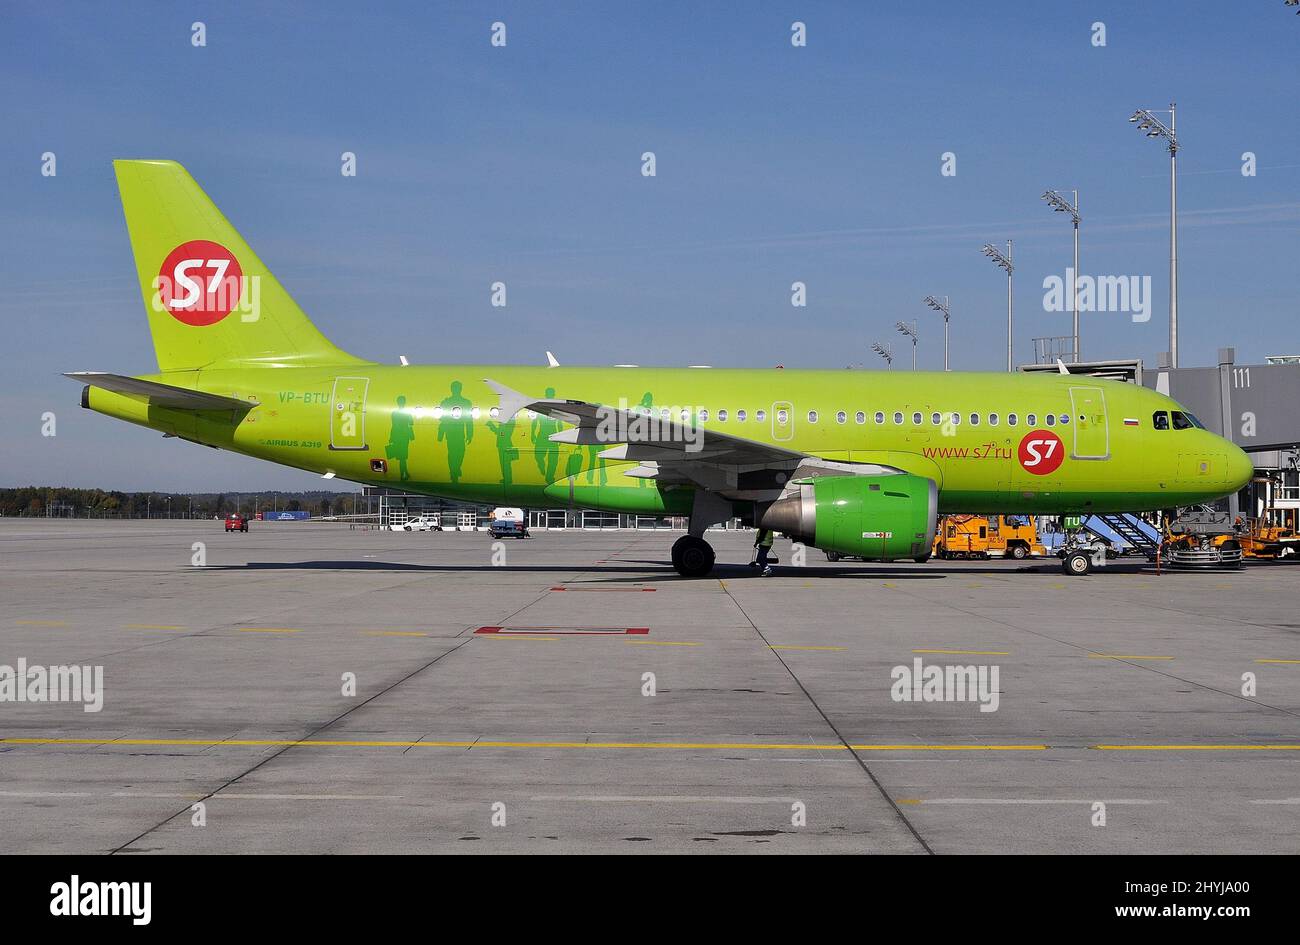 S7 Airlines Airbus A319-100. Bermuda registration cancelled by leasing company due to Russian invasion of Ukraine in 2022. Stock Photo